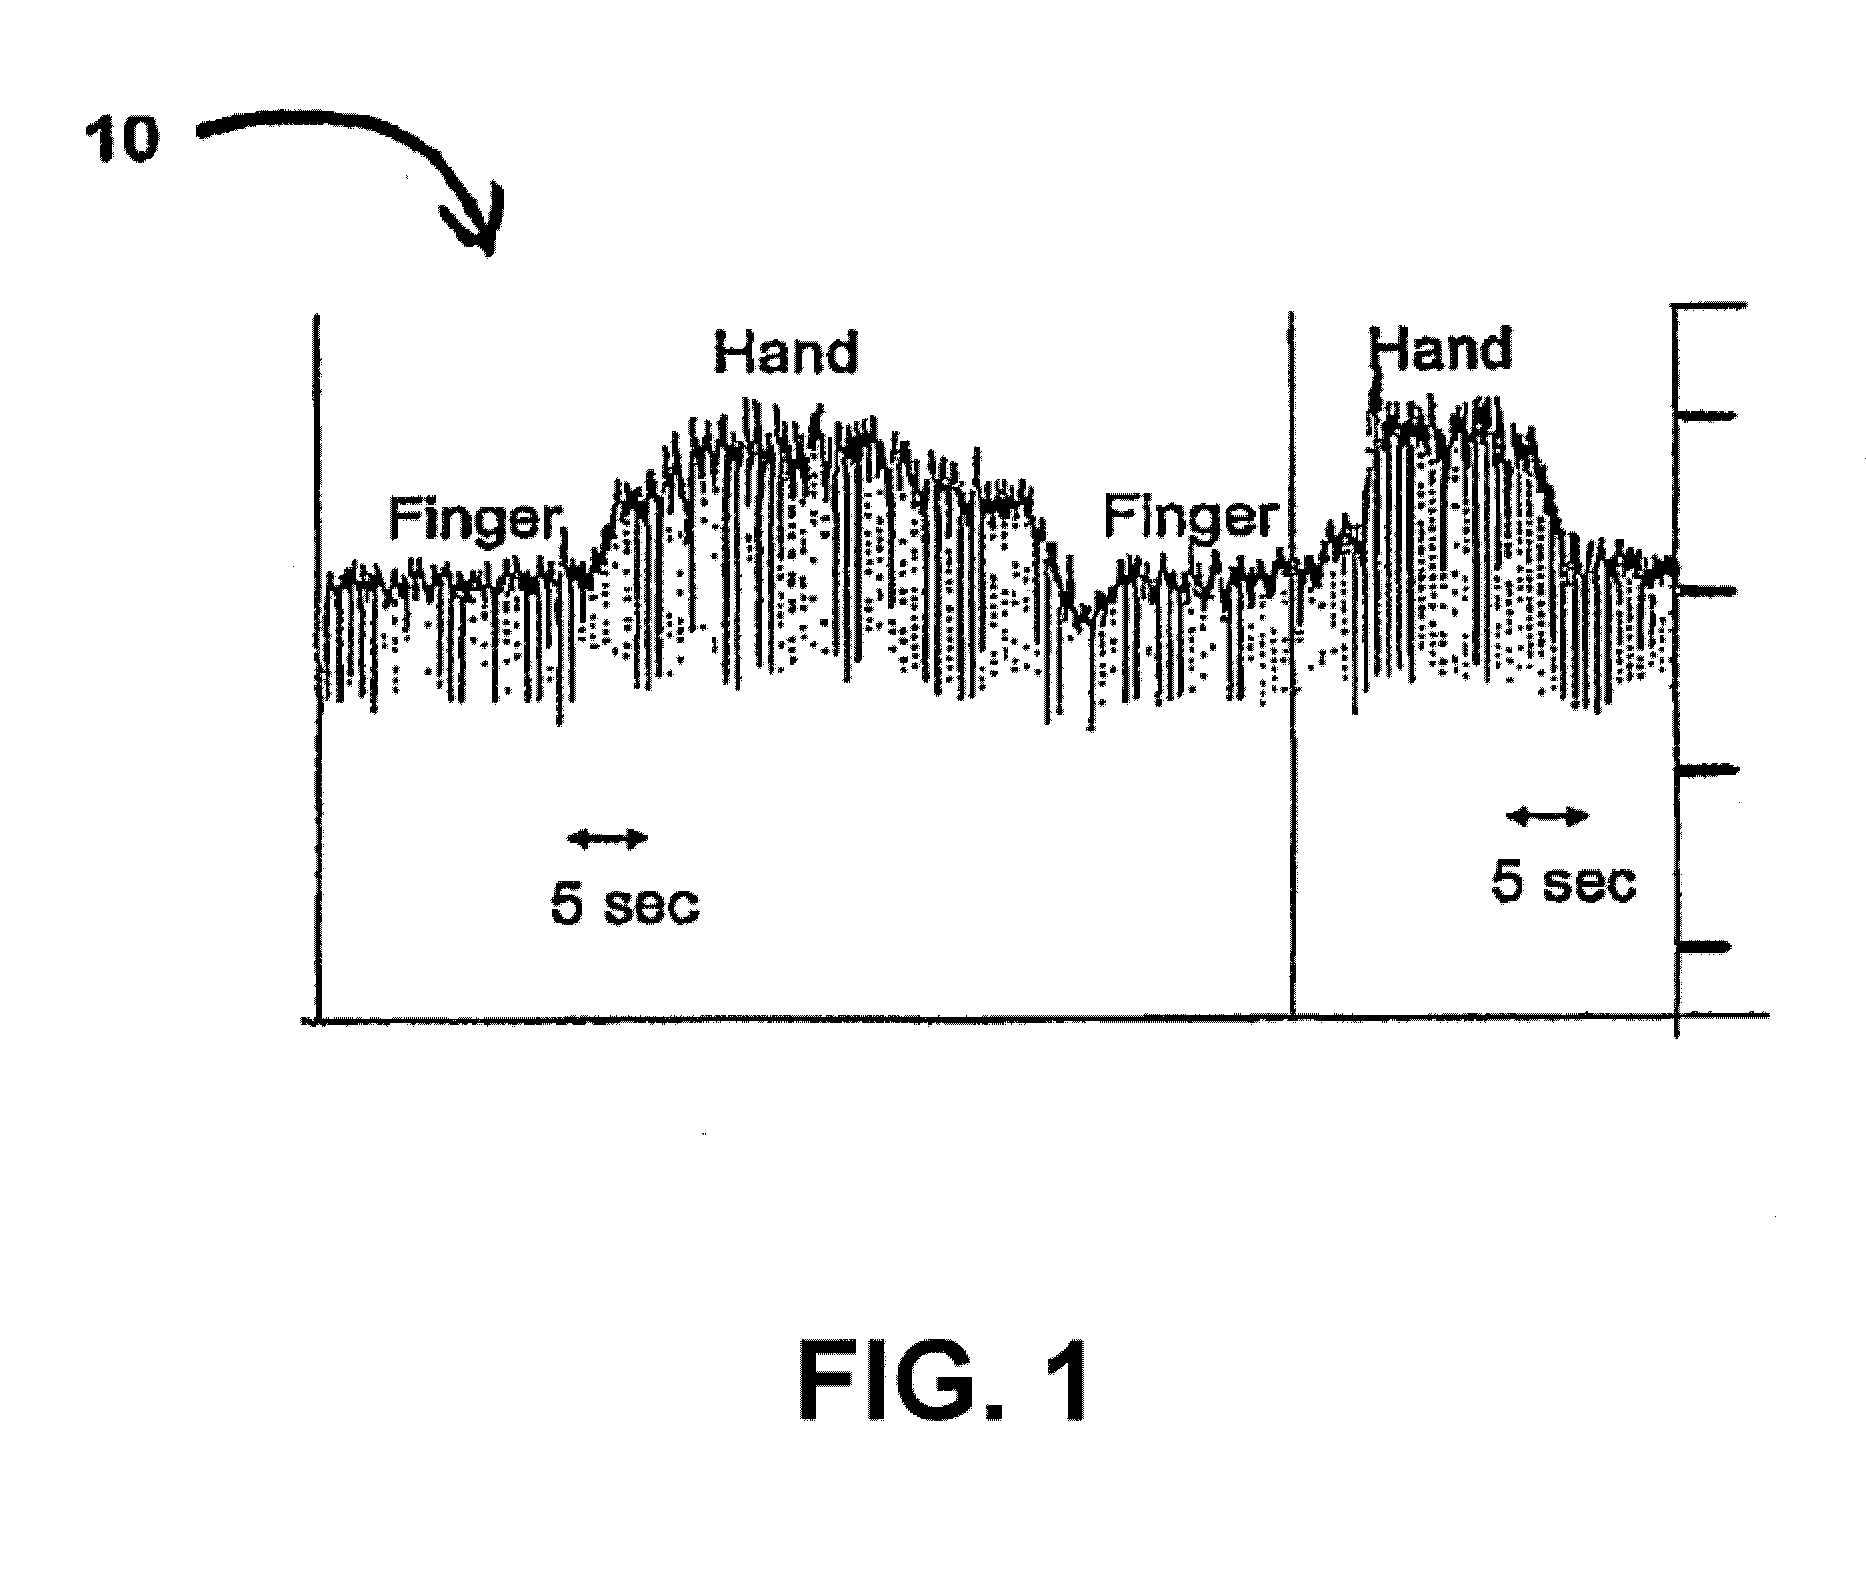 Systems and methods for placing heart leads